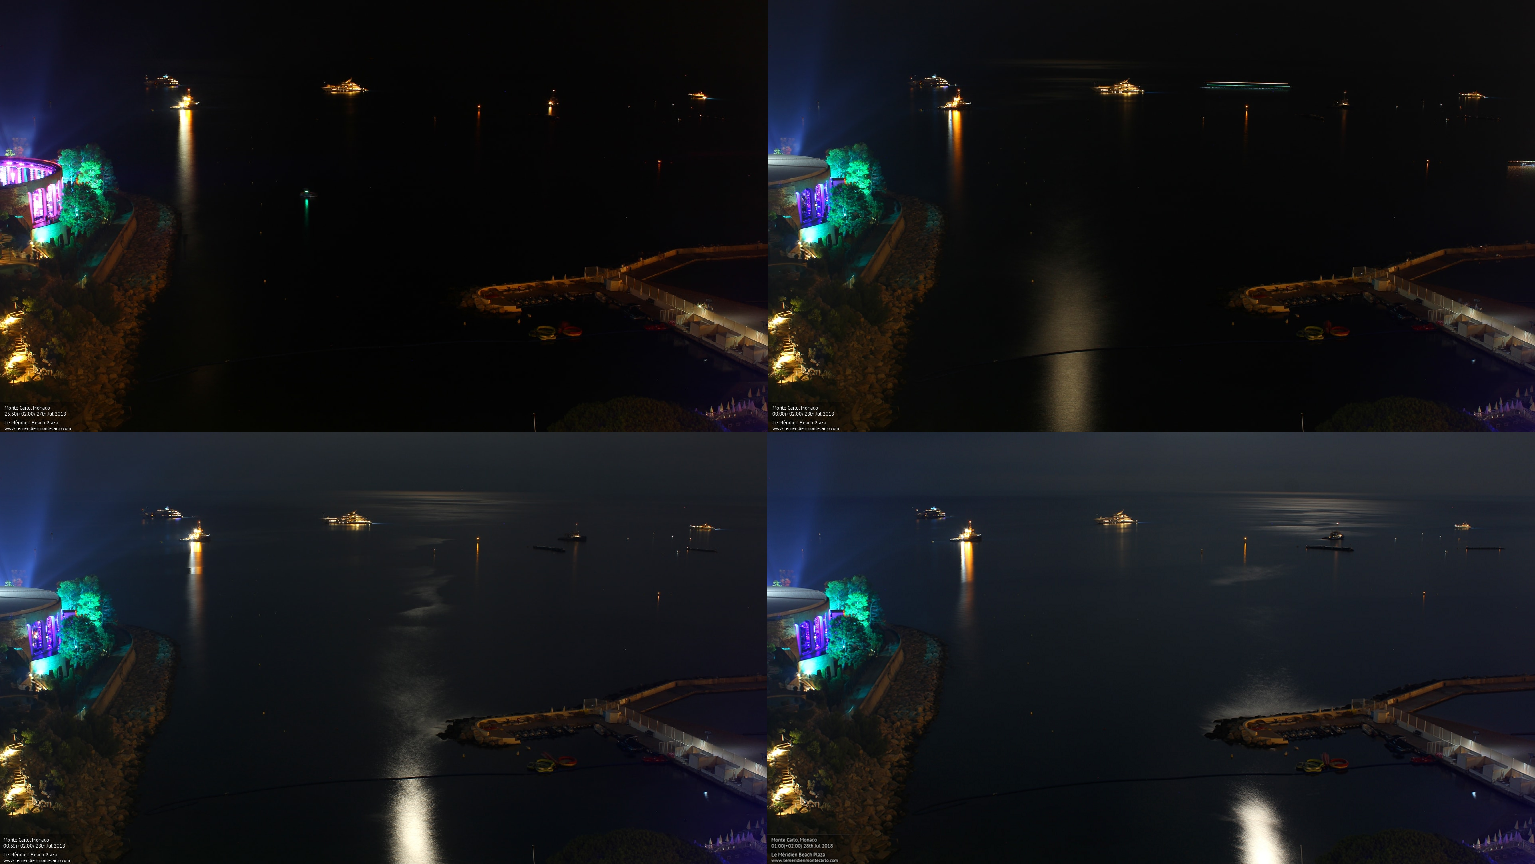 Moonlight reflection from water during 2018 total lunar eclipse seen in Monte Carlo webcam